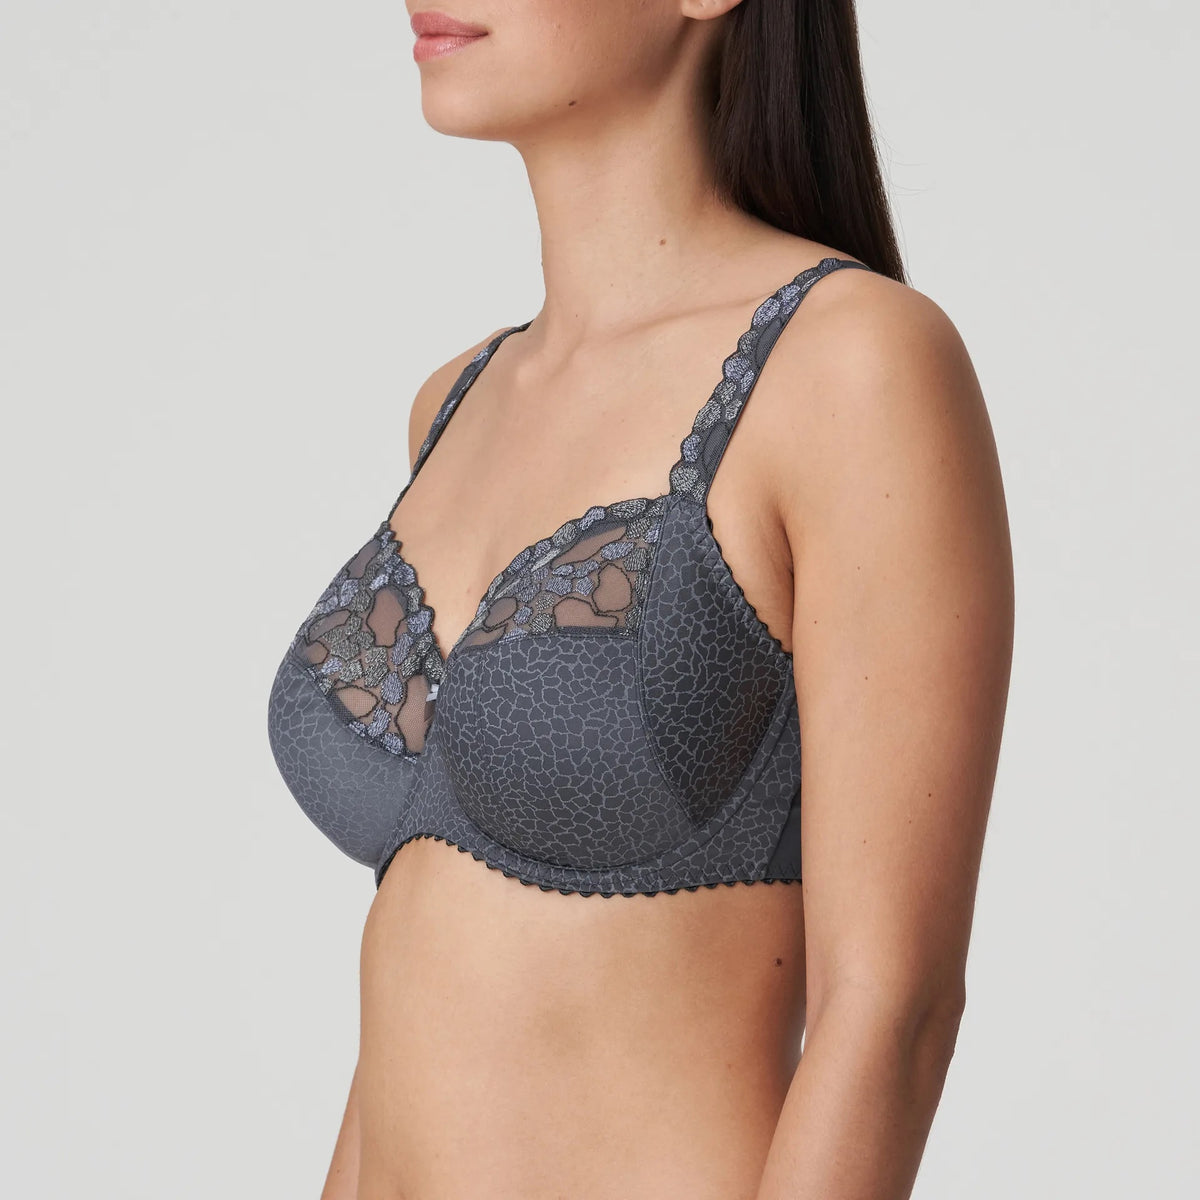 PRIMA DONNA HYDE PARK FULL CUP UNDERWIRED BRA - GRIS CITY